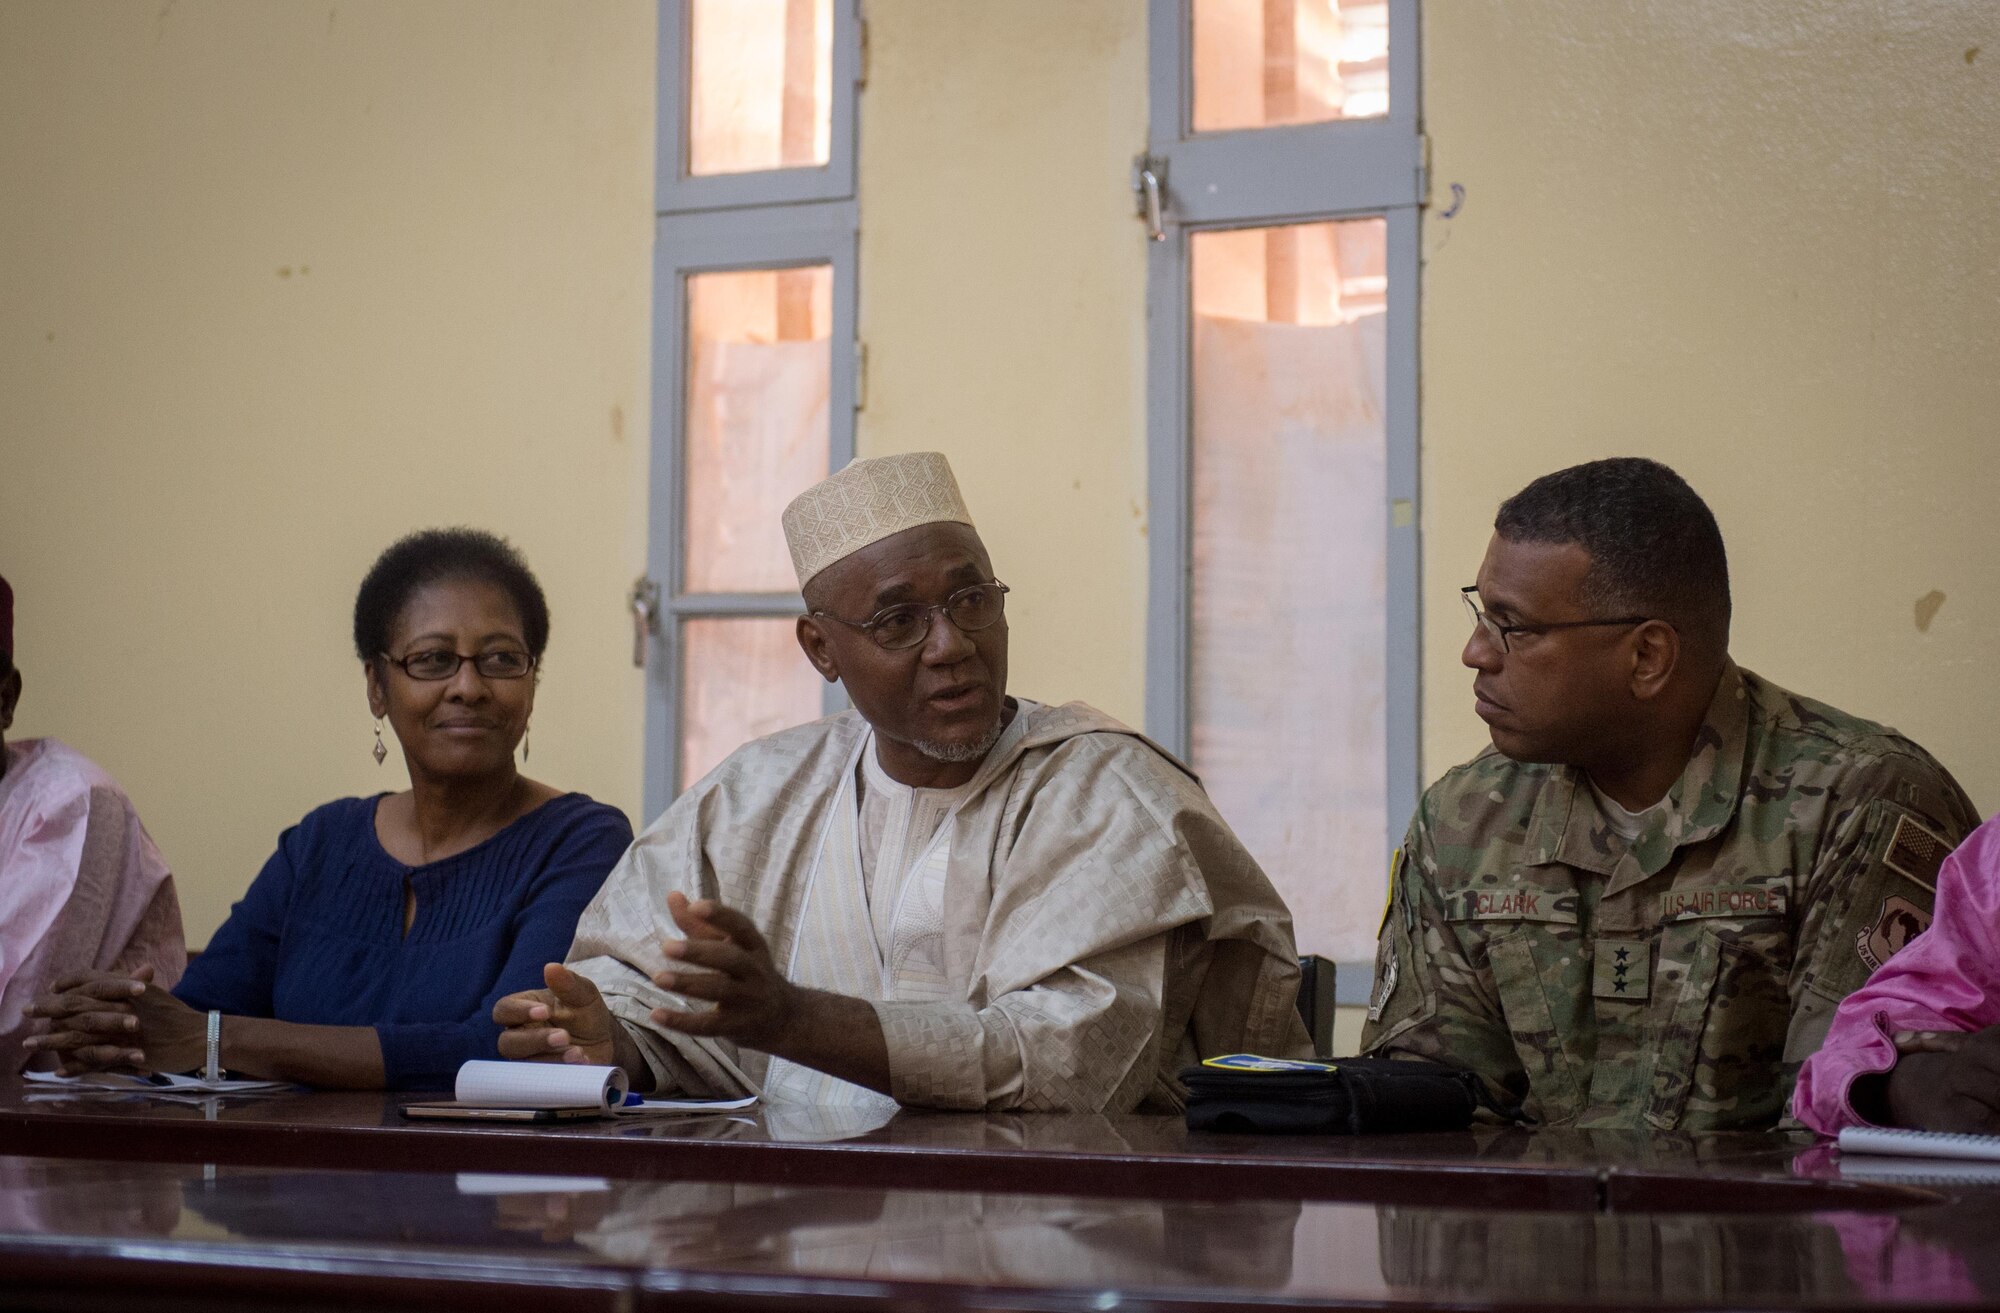 Lt. Gen. Richard Clark, 17th Expeditionary Air Force commander, attends a meeting with Sadou Soloke, governor of Agadez, Niger, during a visit to Air Base 201 in Agadez, Nov. 24, 2016. During a three day trip, Clark visited Airmen in Europe and Africa who support the Air Force's intelligence, surveillance and reconnaissance mission. This was Clark's first visit to NAS Sigonella, Niamey and Agadez as 17th Expeditionary Air Force commander. (U.S. Air Force photo by Tech. Sgt. Ryan Crane)